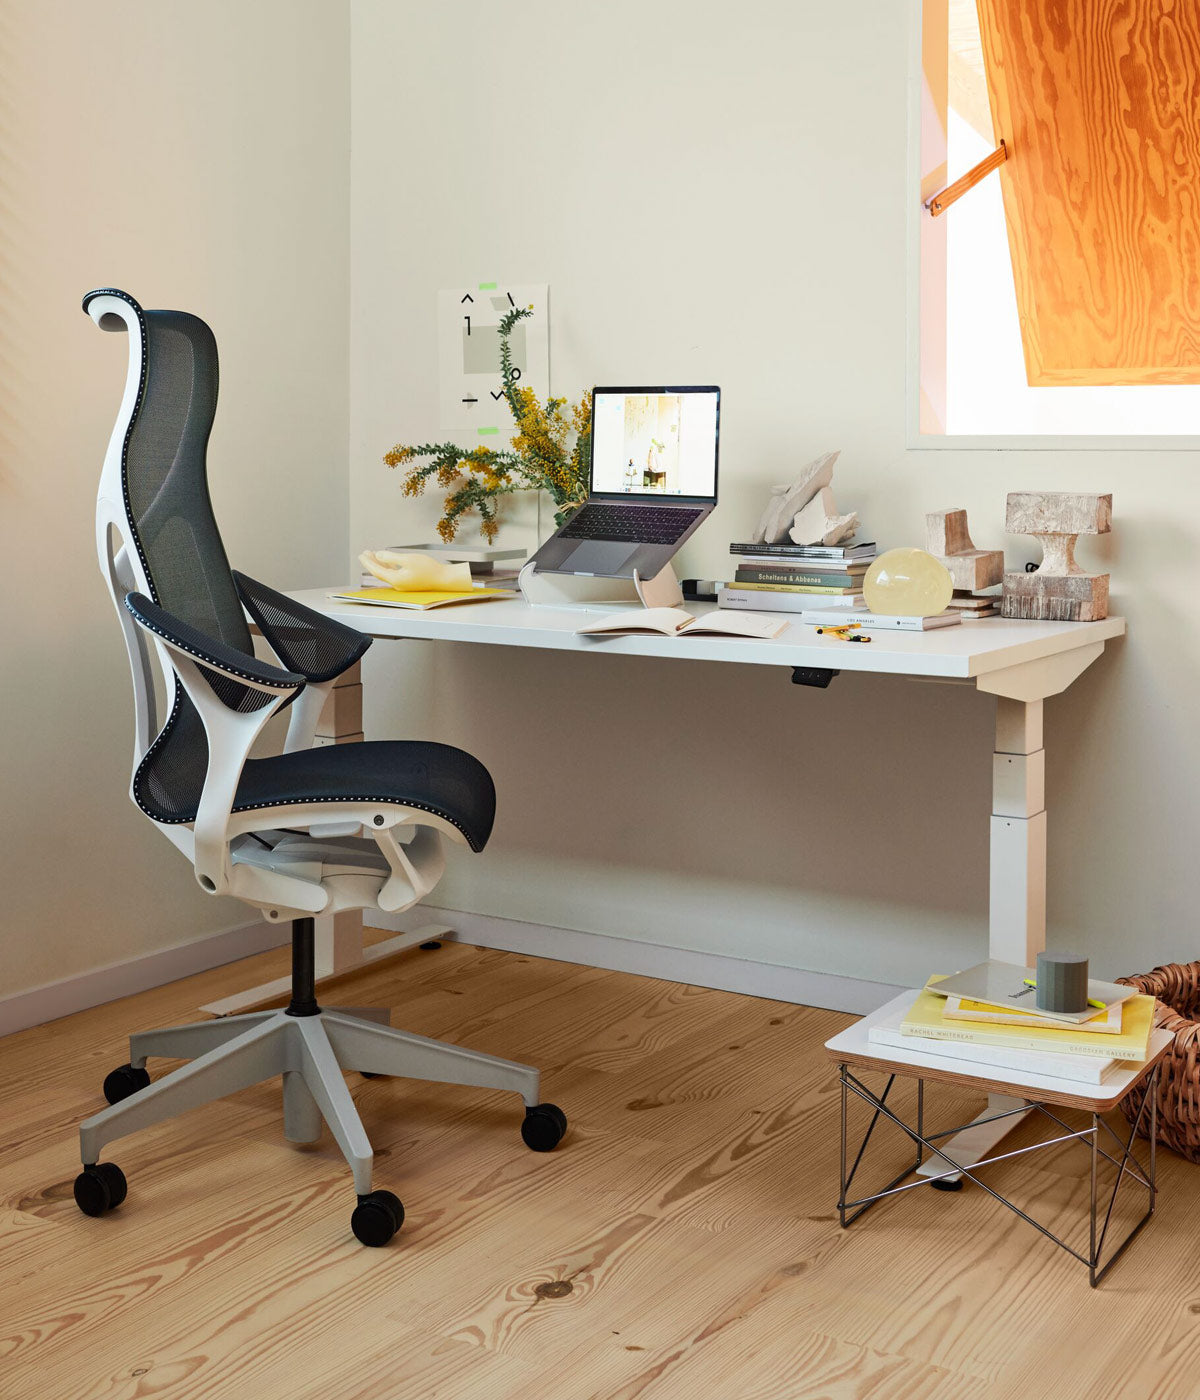 A Herman Miller Cosm Desk Chair in white and blue with an all white Nevi Sit Stand Desk